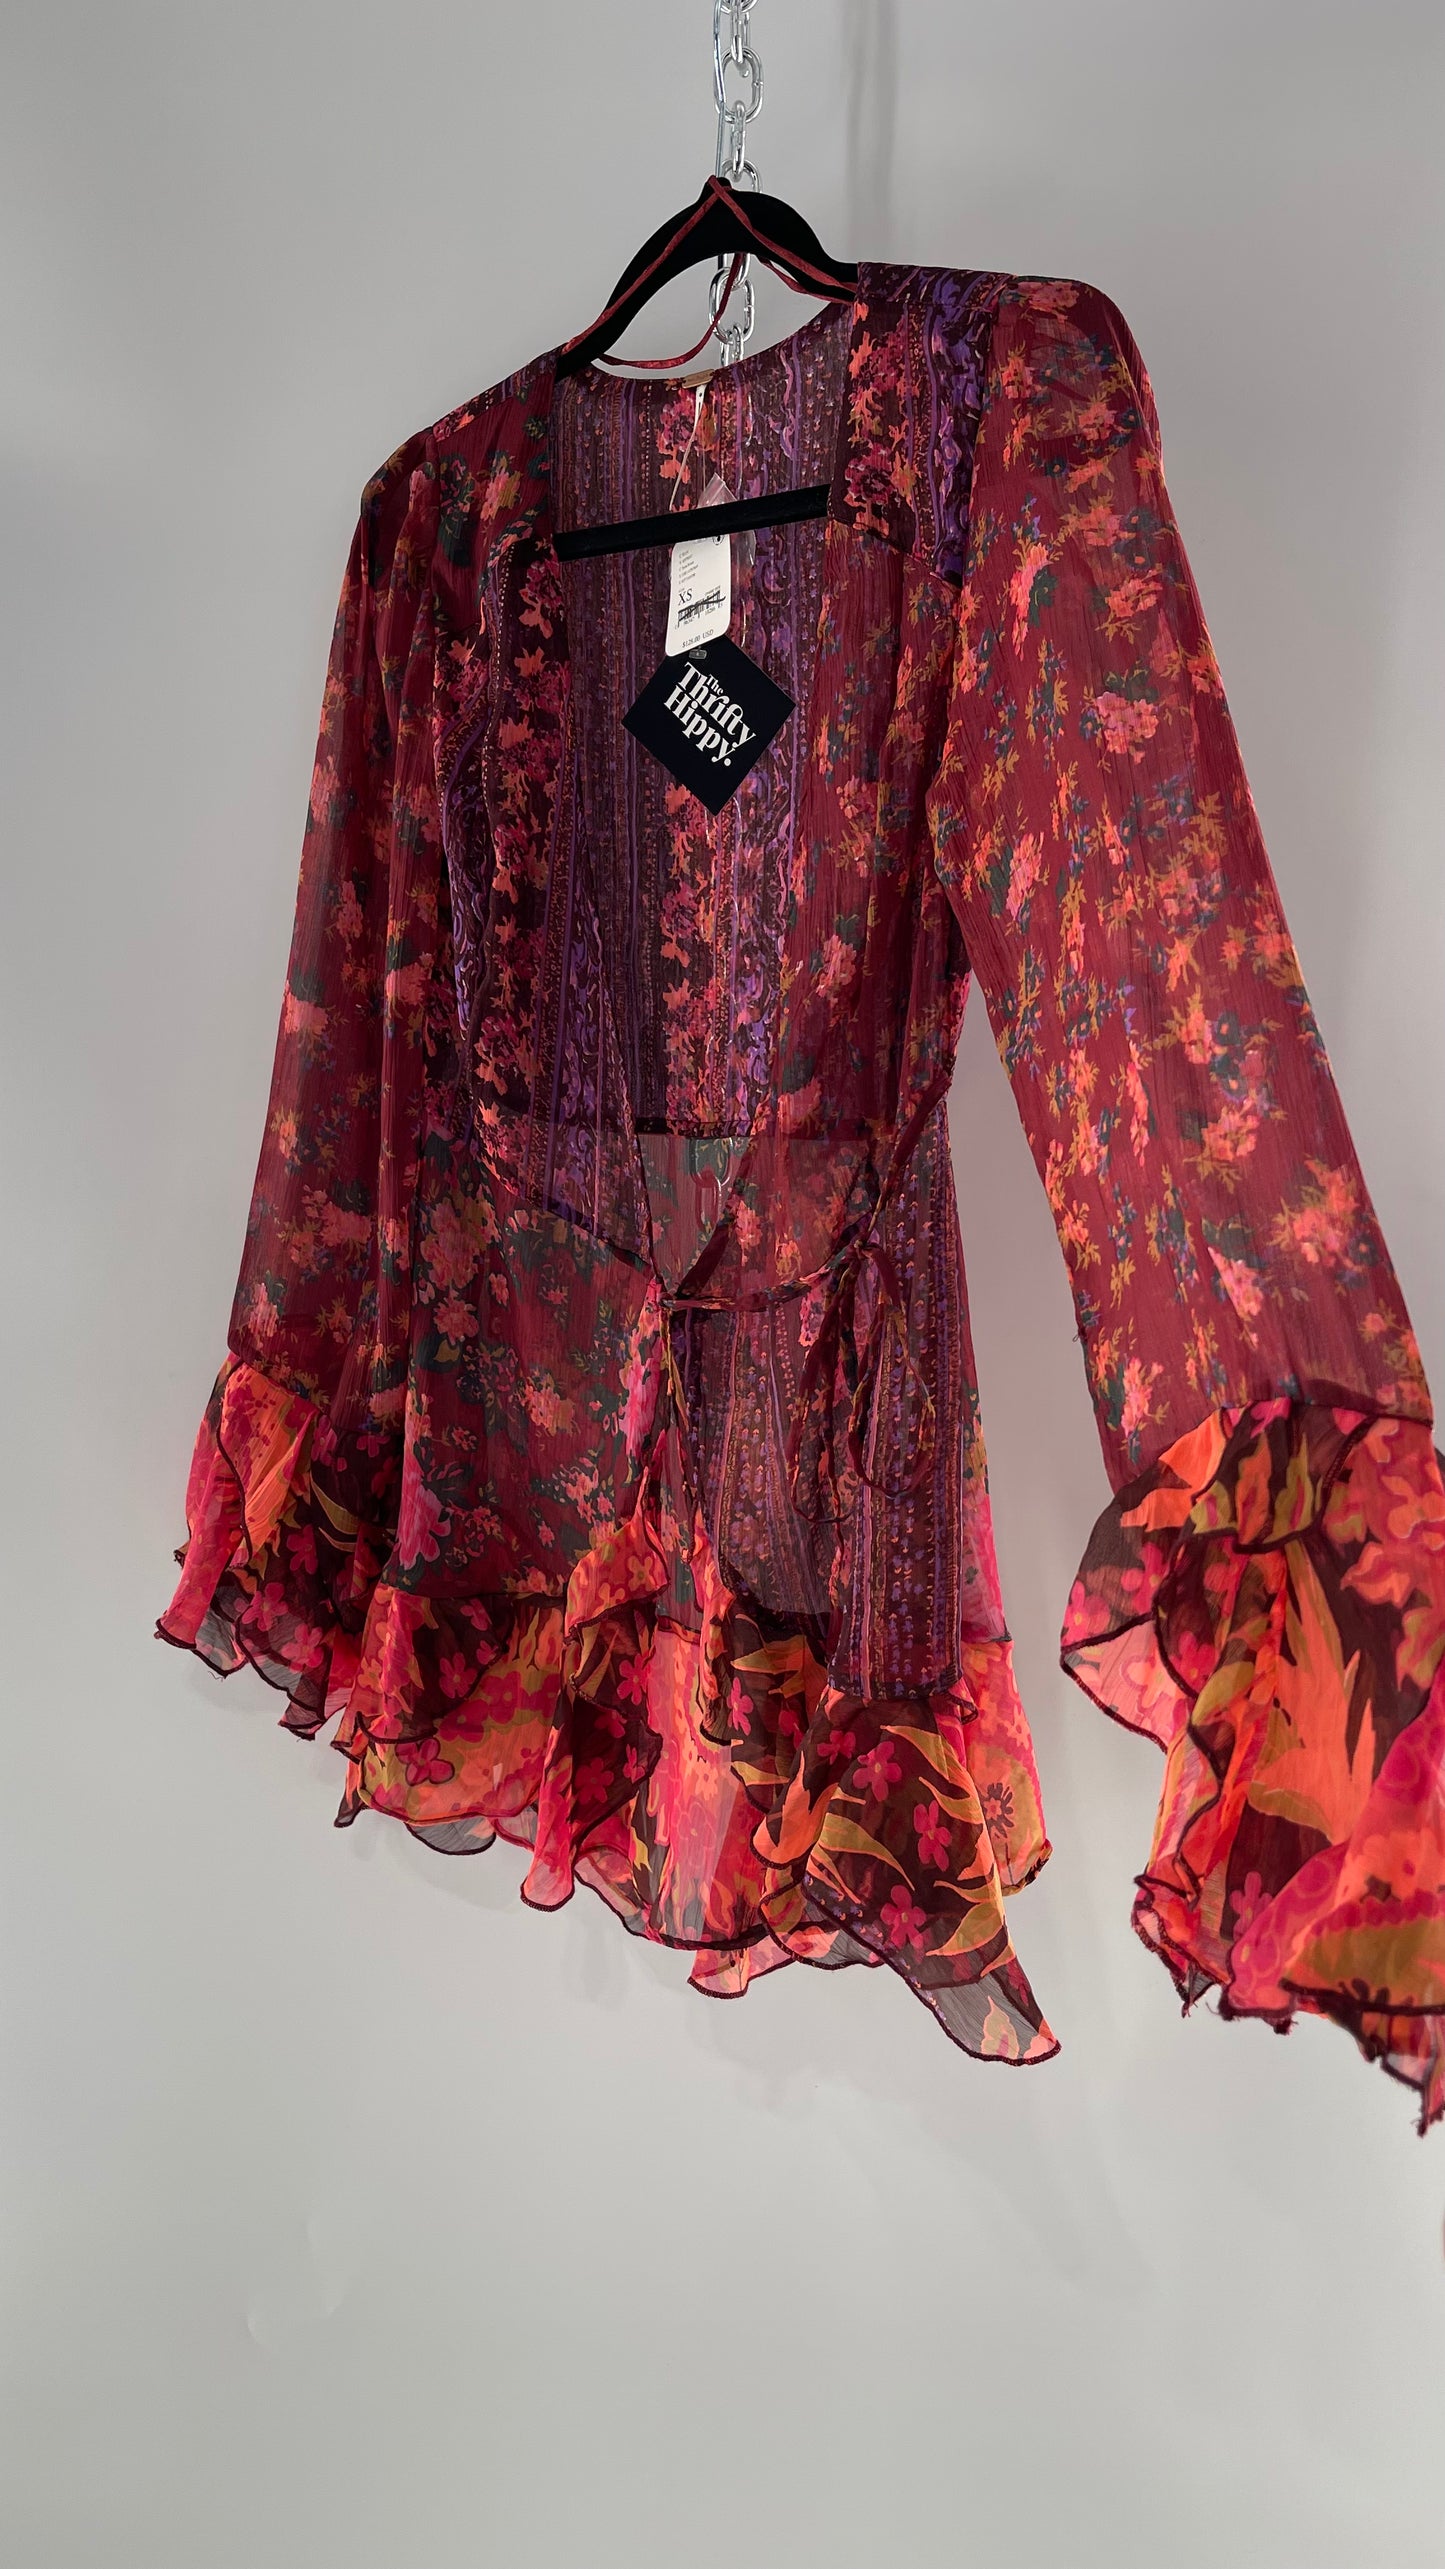 Free People Maroon/Burgundy Red Floral Tie Front Blouse with Ruffled Sleeves and Hem with Tags Attached  (XS)